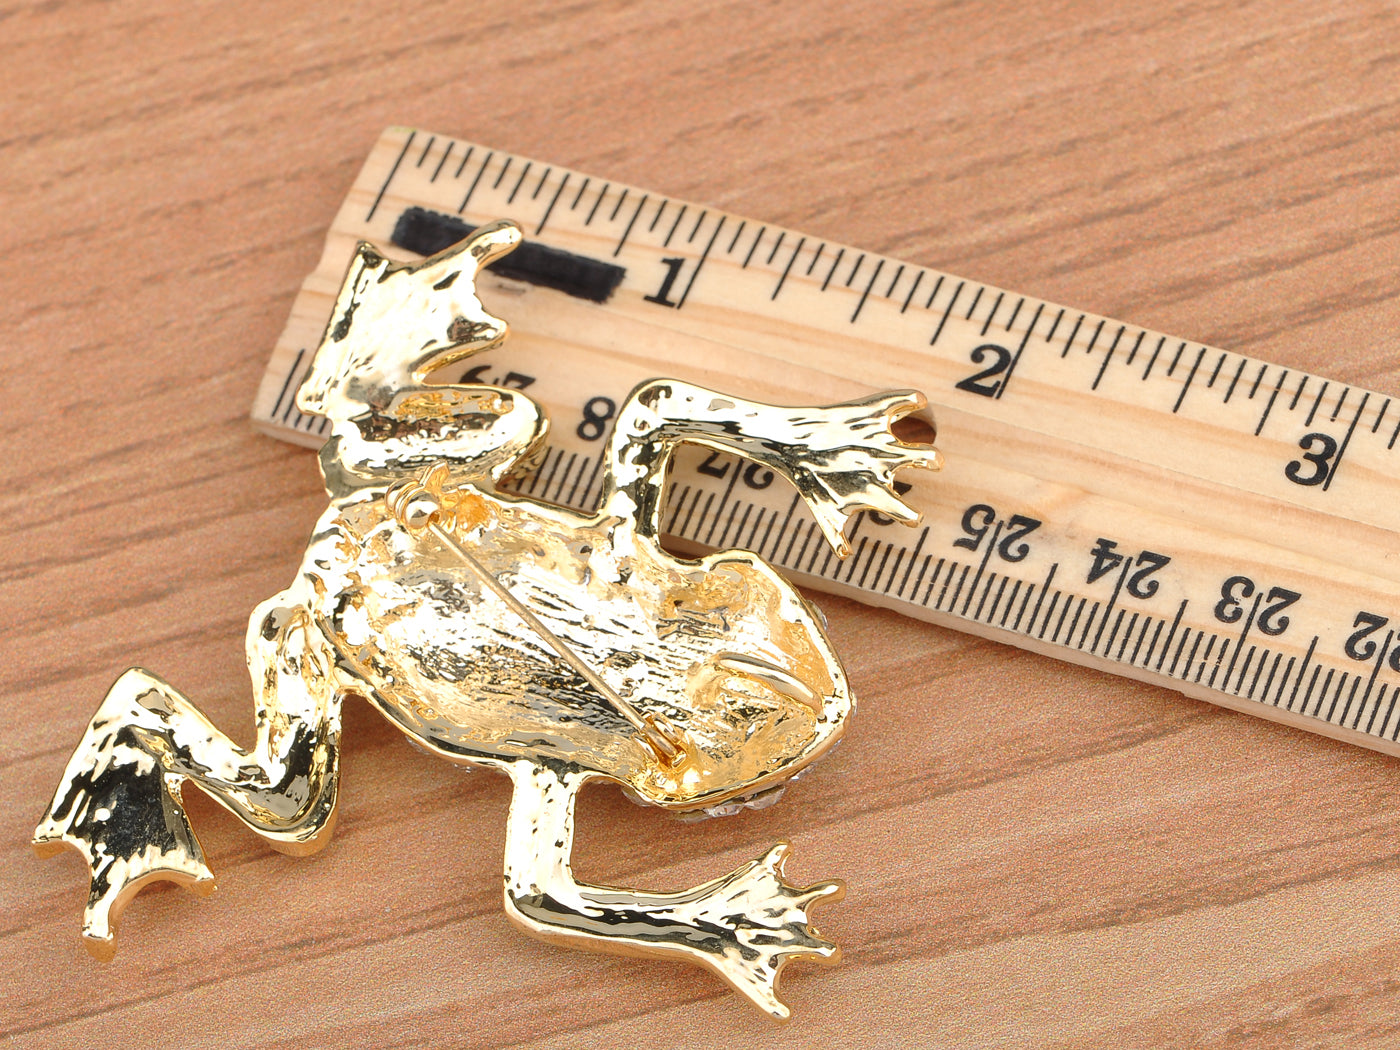 Adorable Frog Animal Jewelry Clothes Pin Brooch For Women